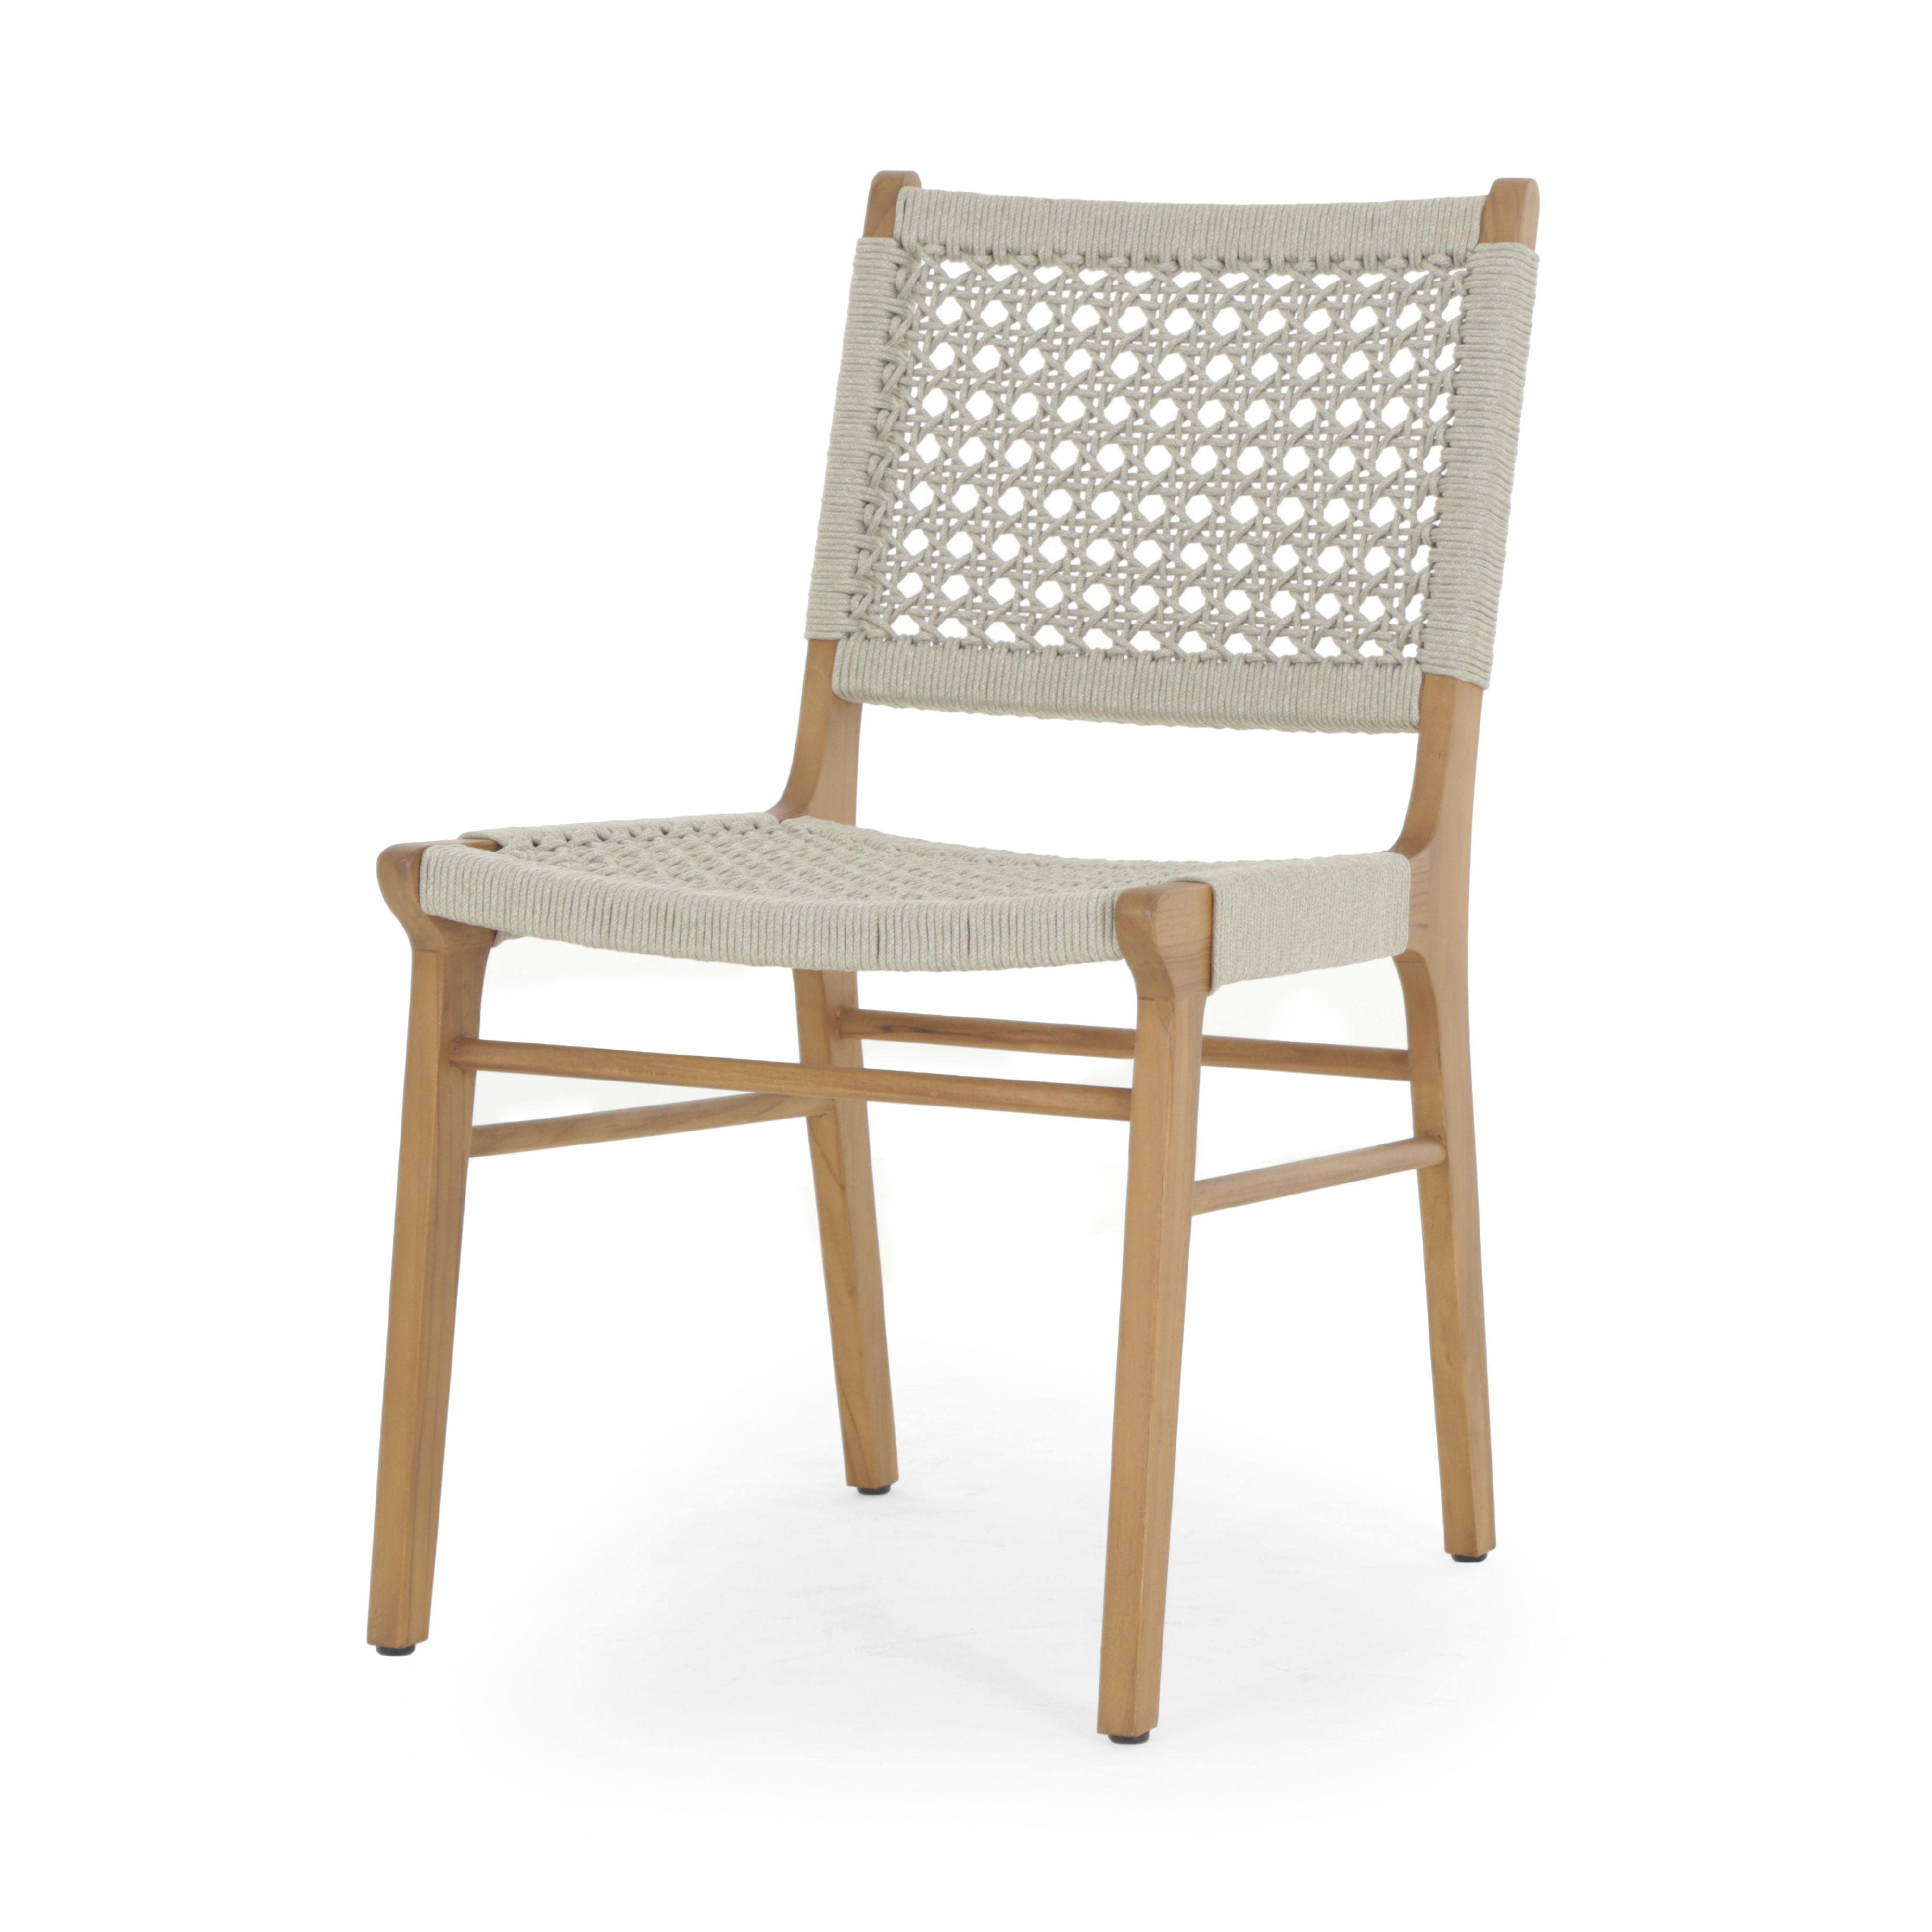 Delmar Outdoor Dining Chair | Scout & Nimble